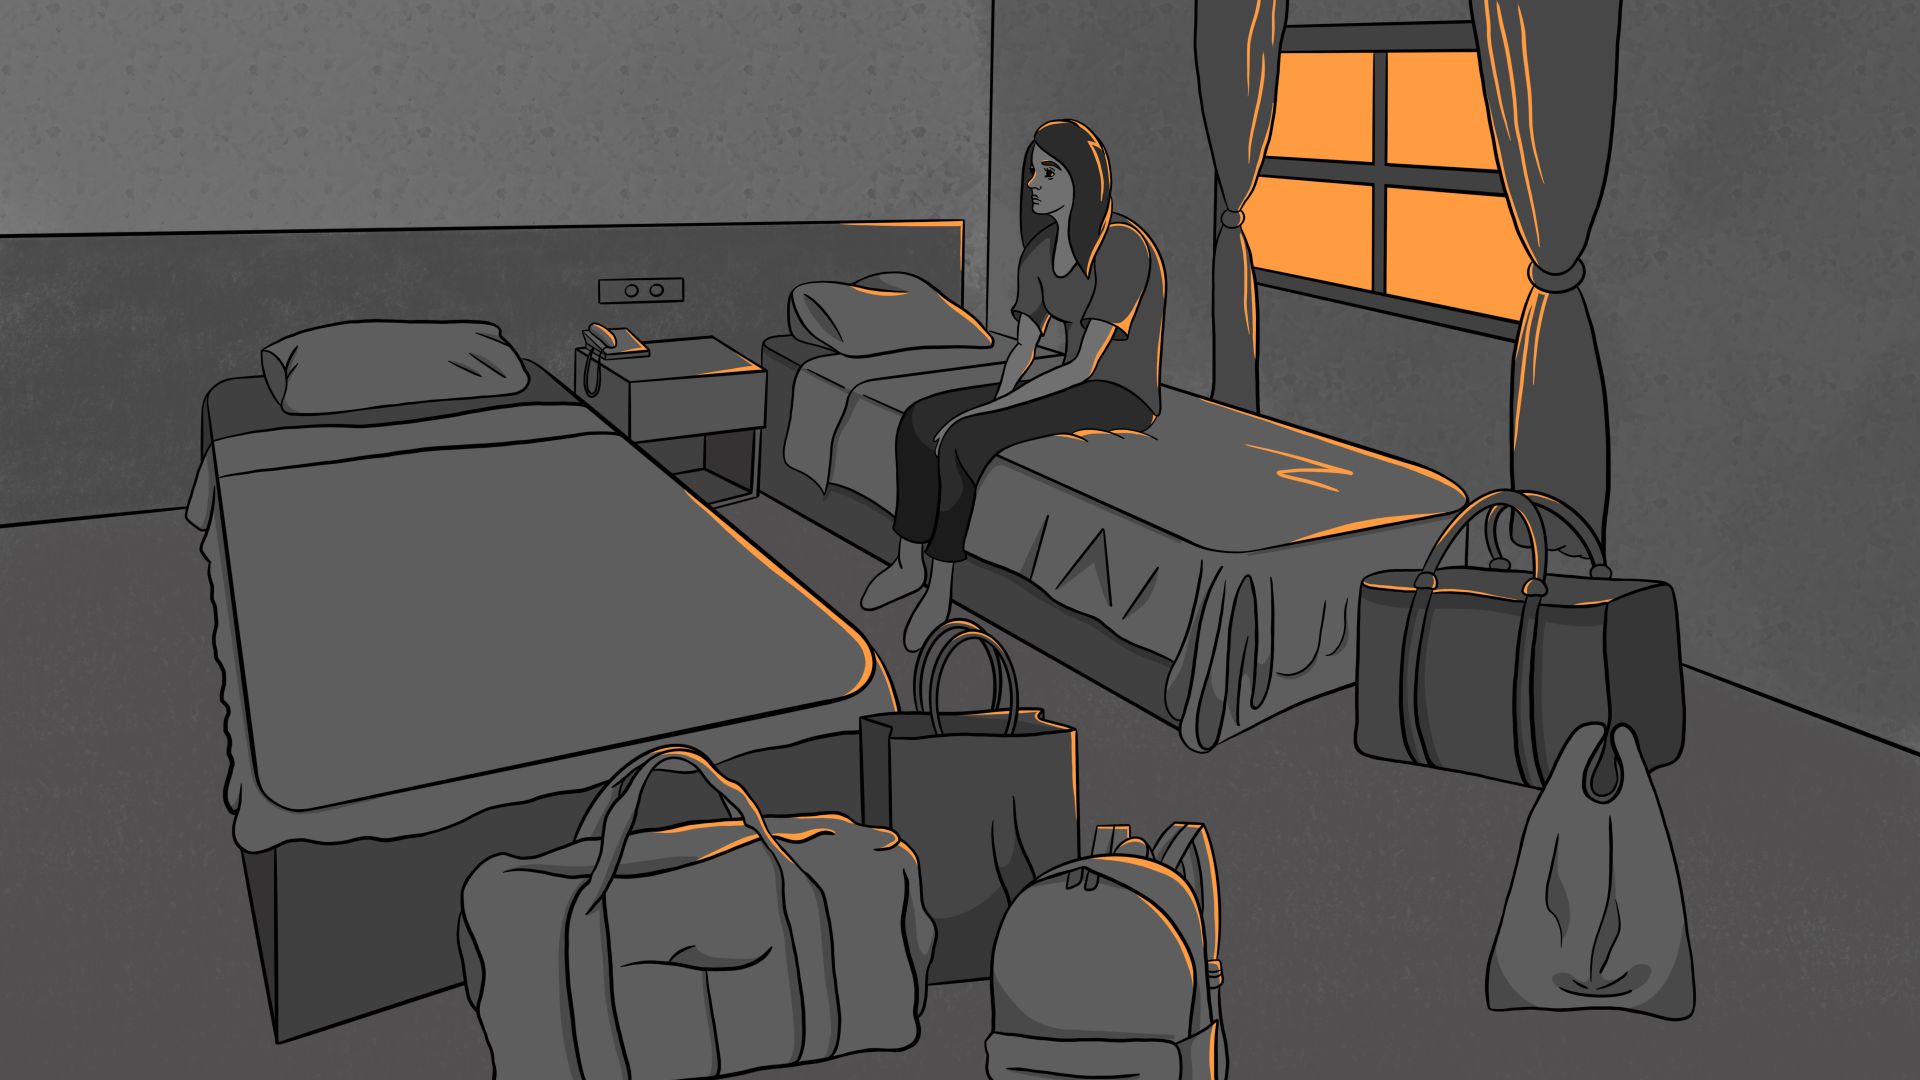 An illustration of a woman sitting on a bed with bags and suitcases in front of the bed,